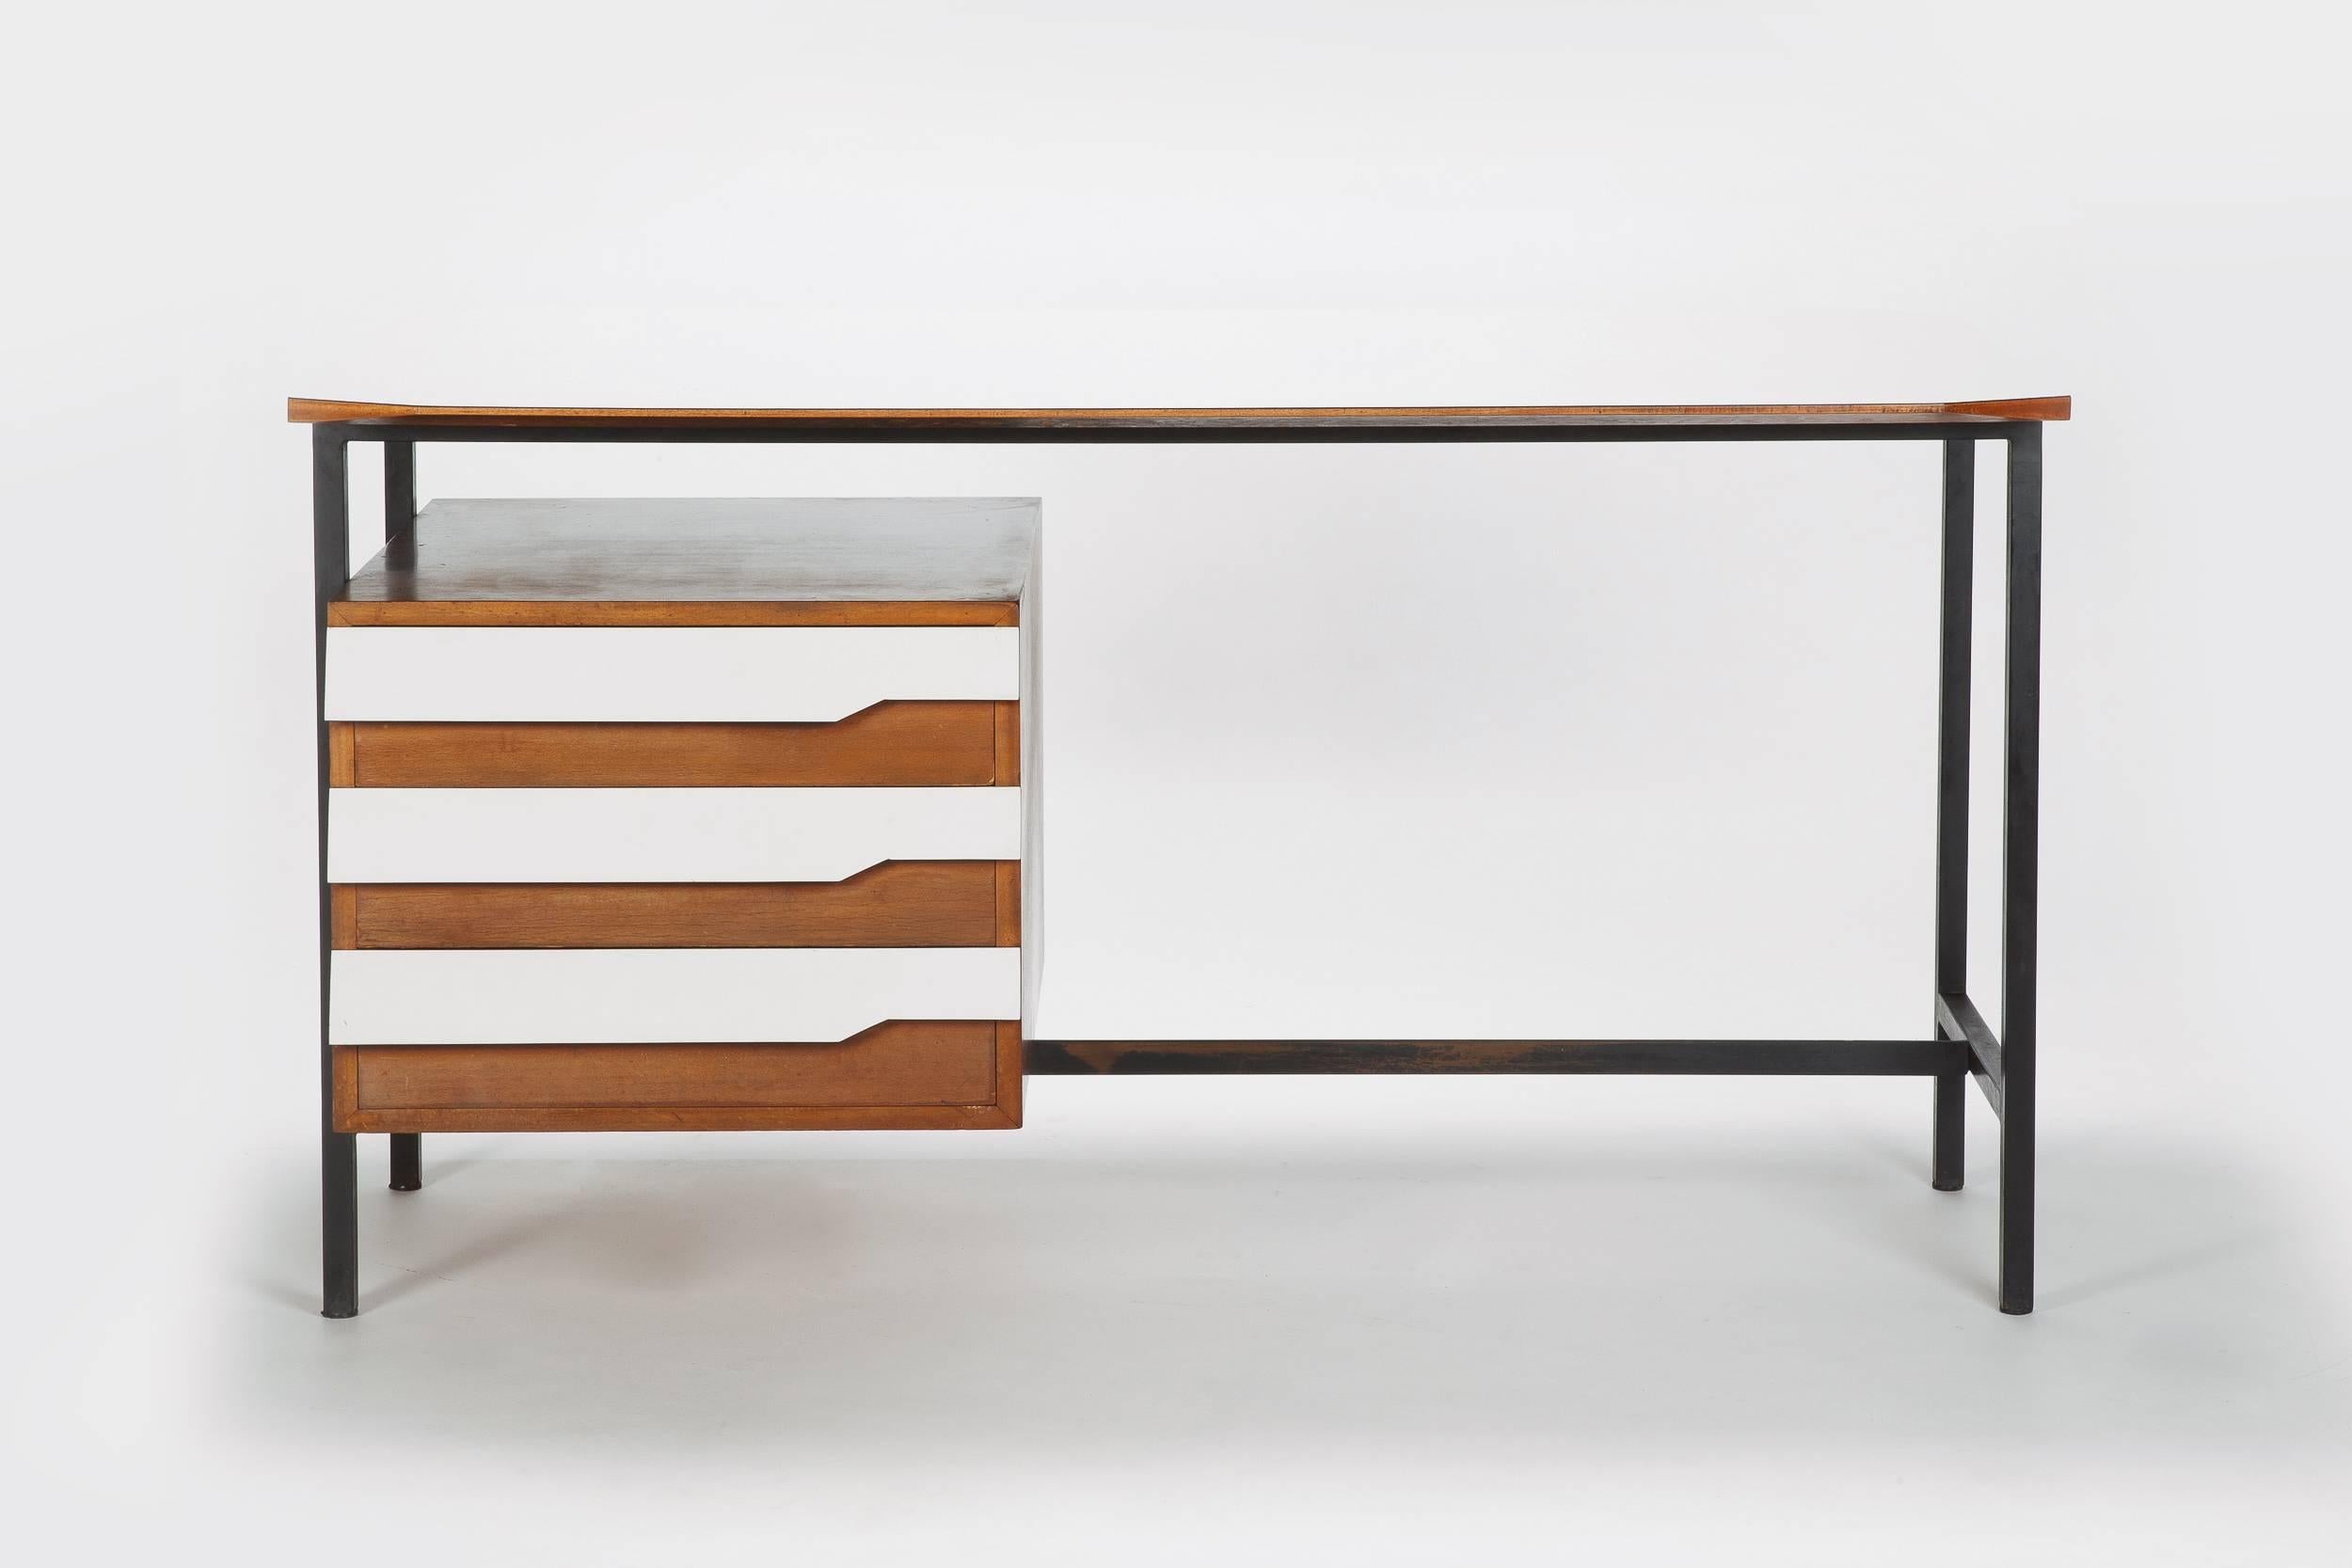 Stunning Vittorio Dassi desk manufactured in Italy in the 1950s. The body is made of mahogany with a white Formica tabletop and contrasting white drawers, the legs are made of black lacquered steel tube. High-quality craftsmanship with wonderful